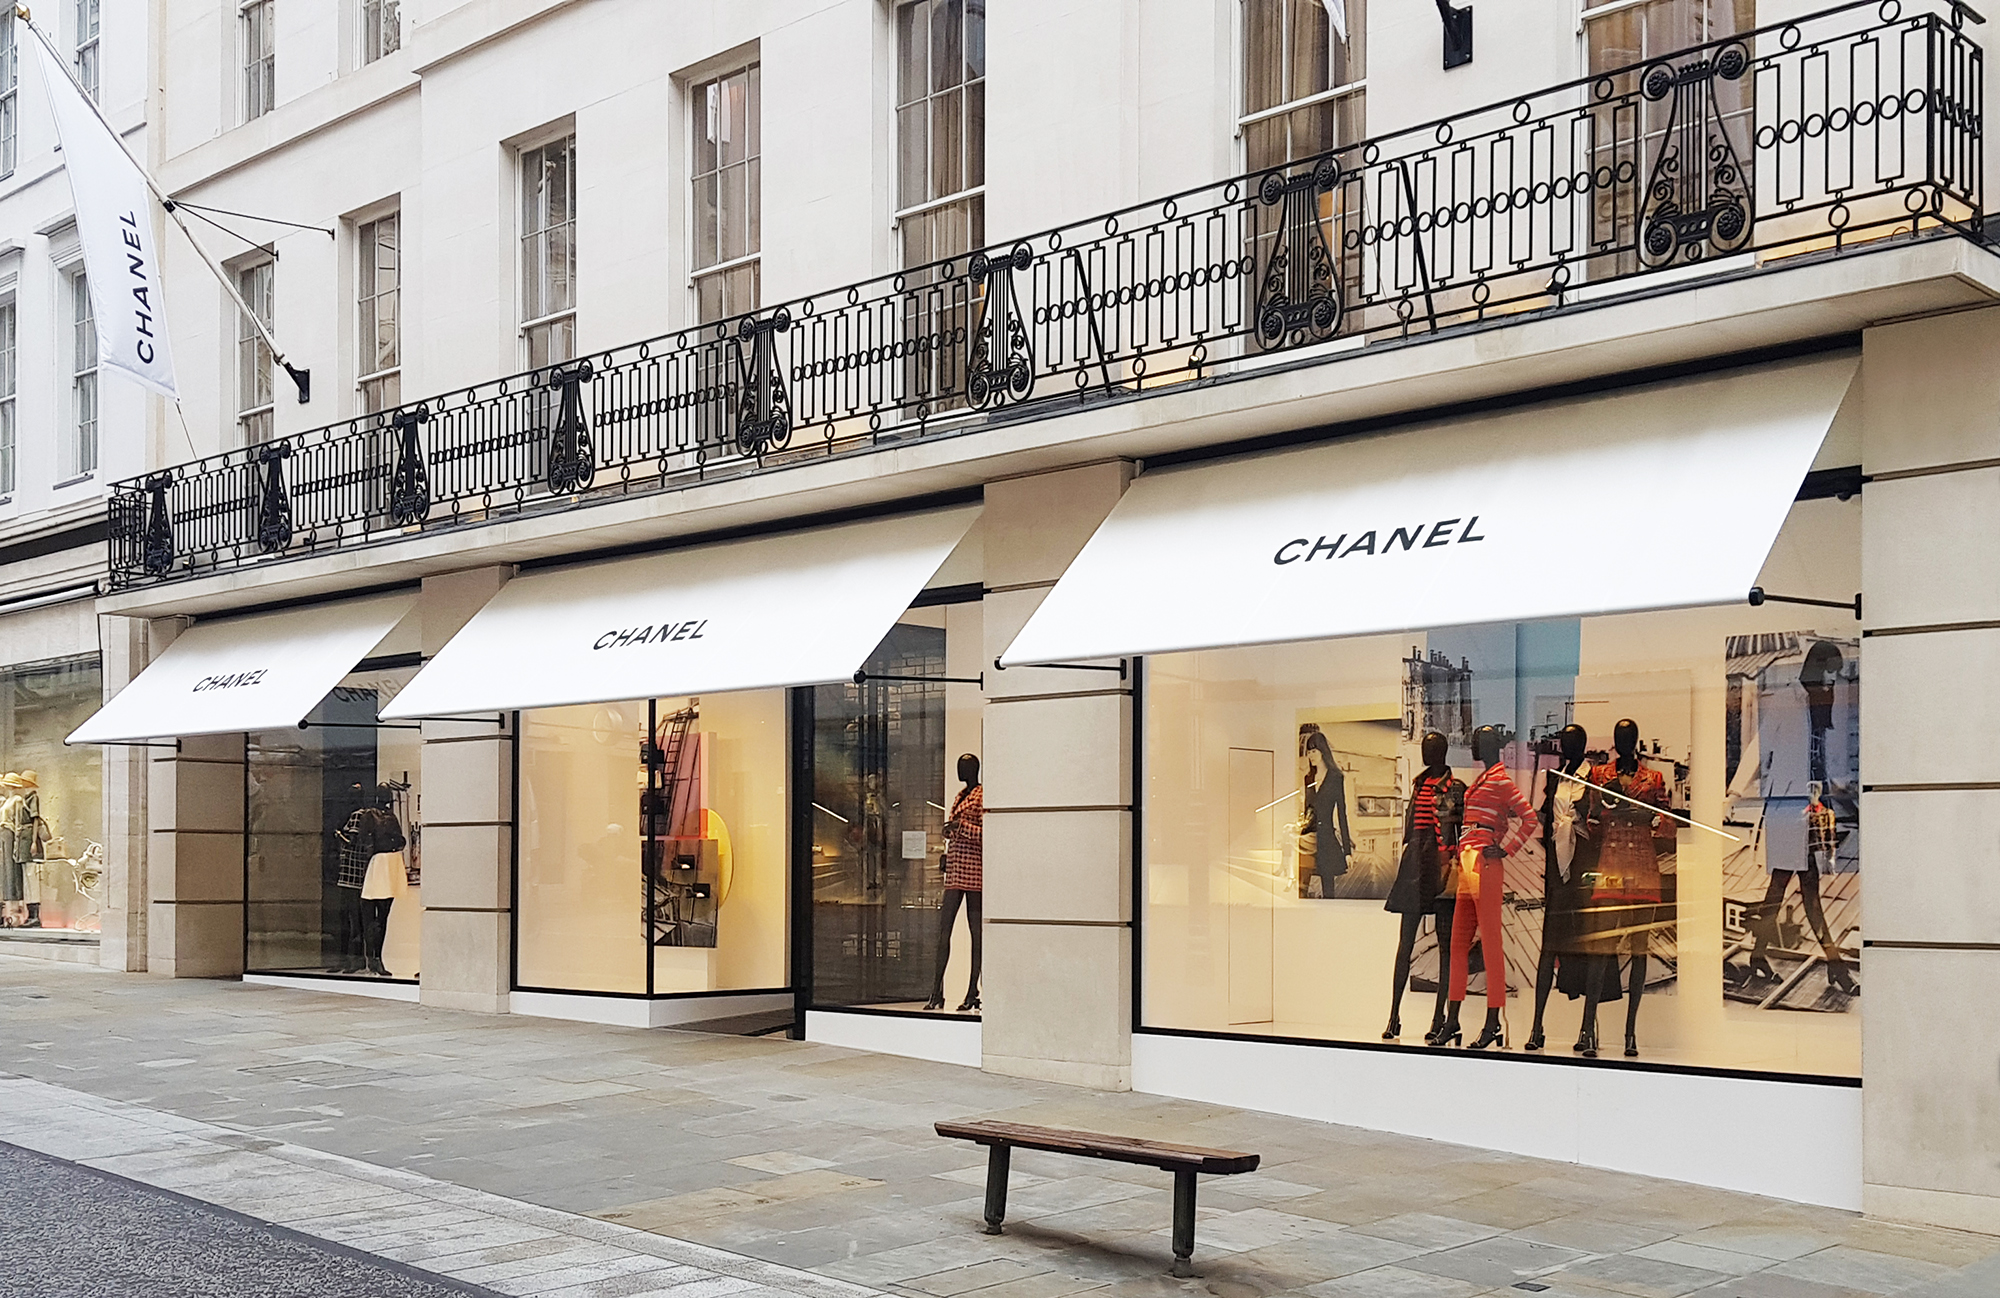 Greenwich awnings at Chanel flagship boutique, New Bond Street